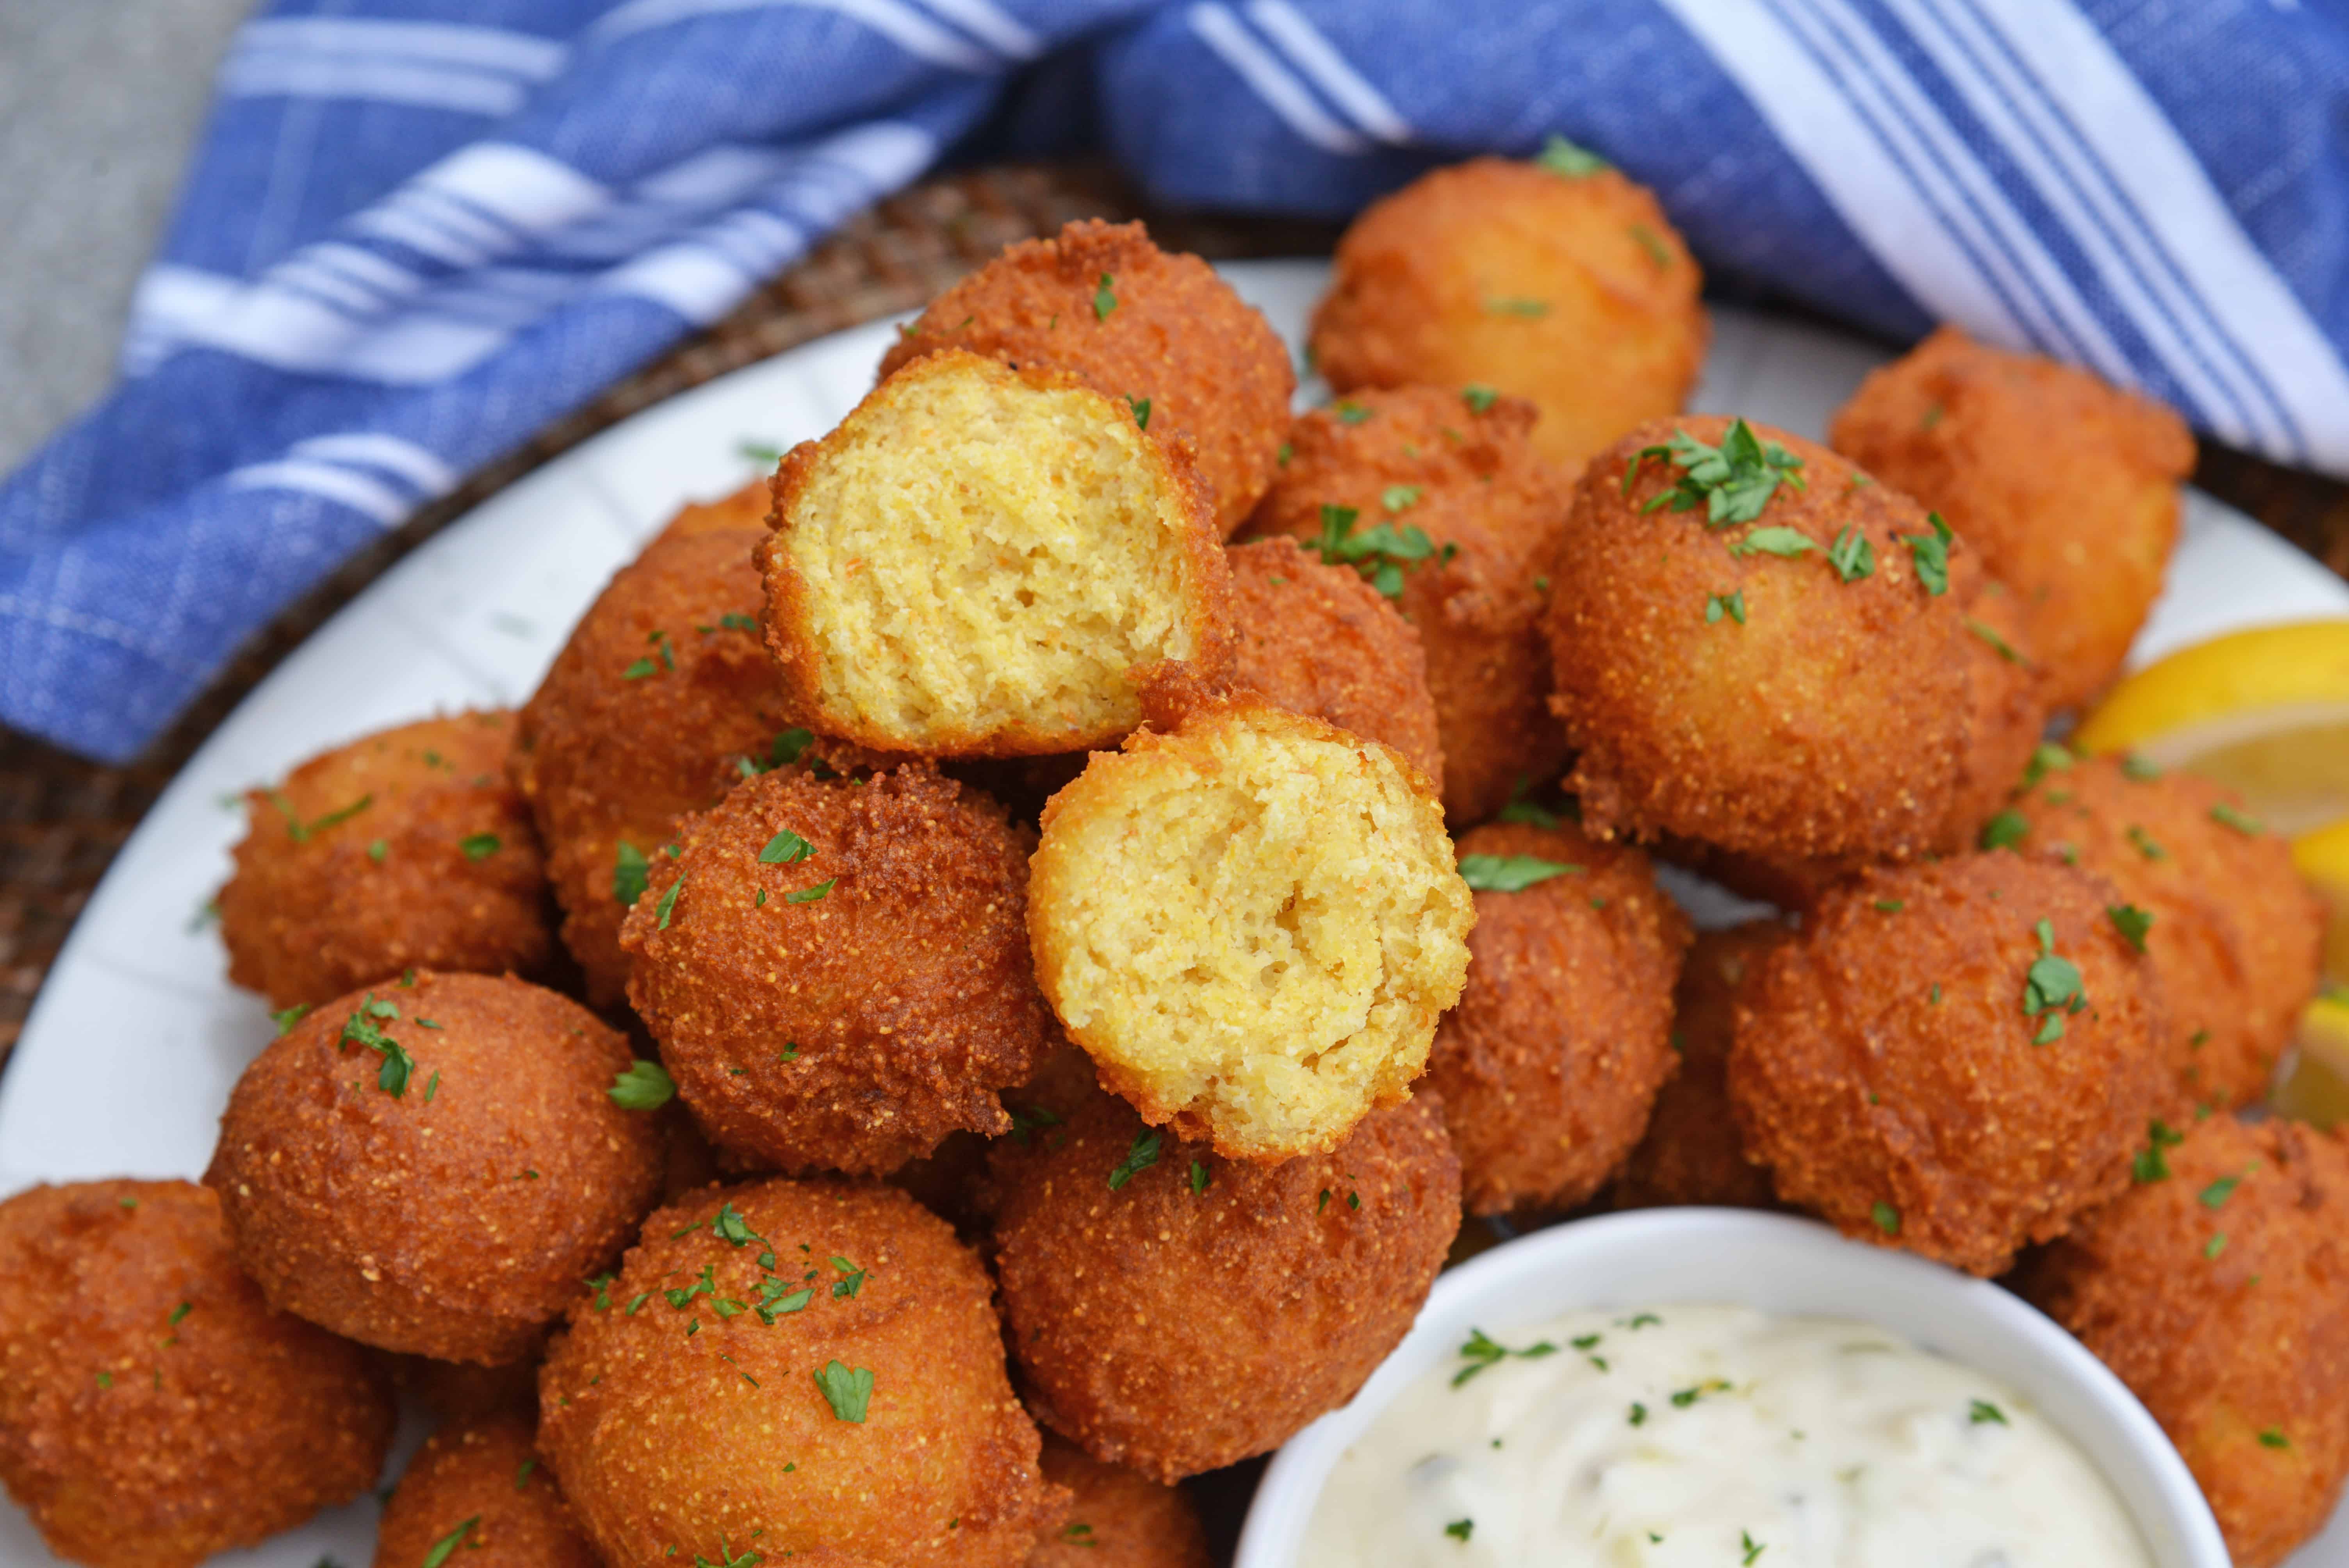 Best Recipe for Hush Puppies - Savory Experiments